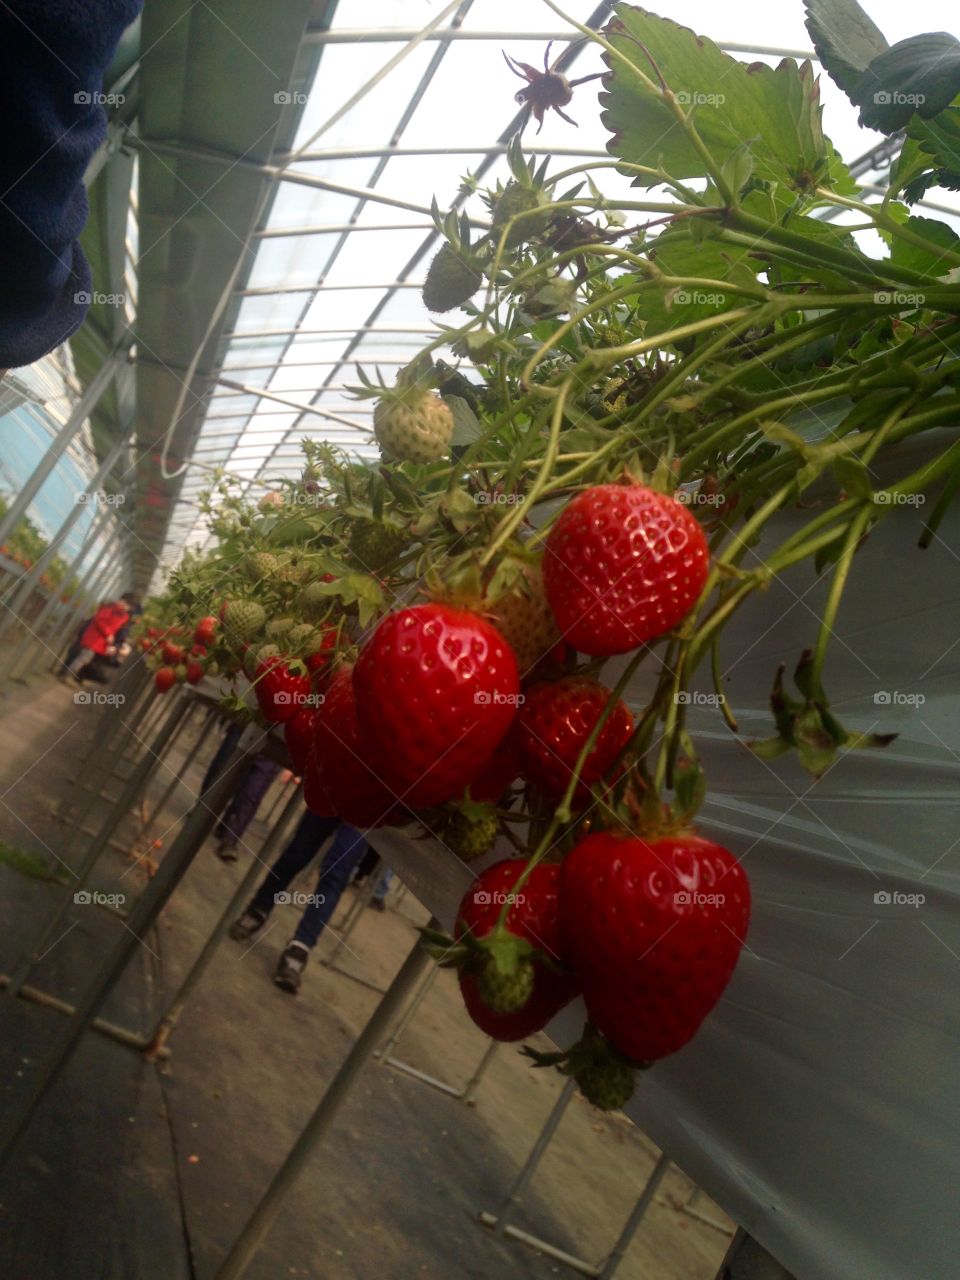 Strawberry Picking Experience